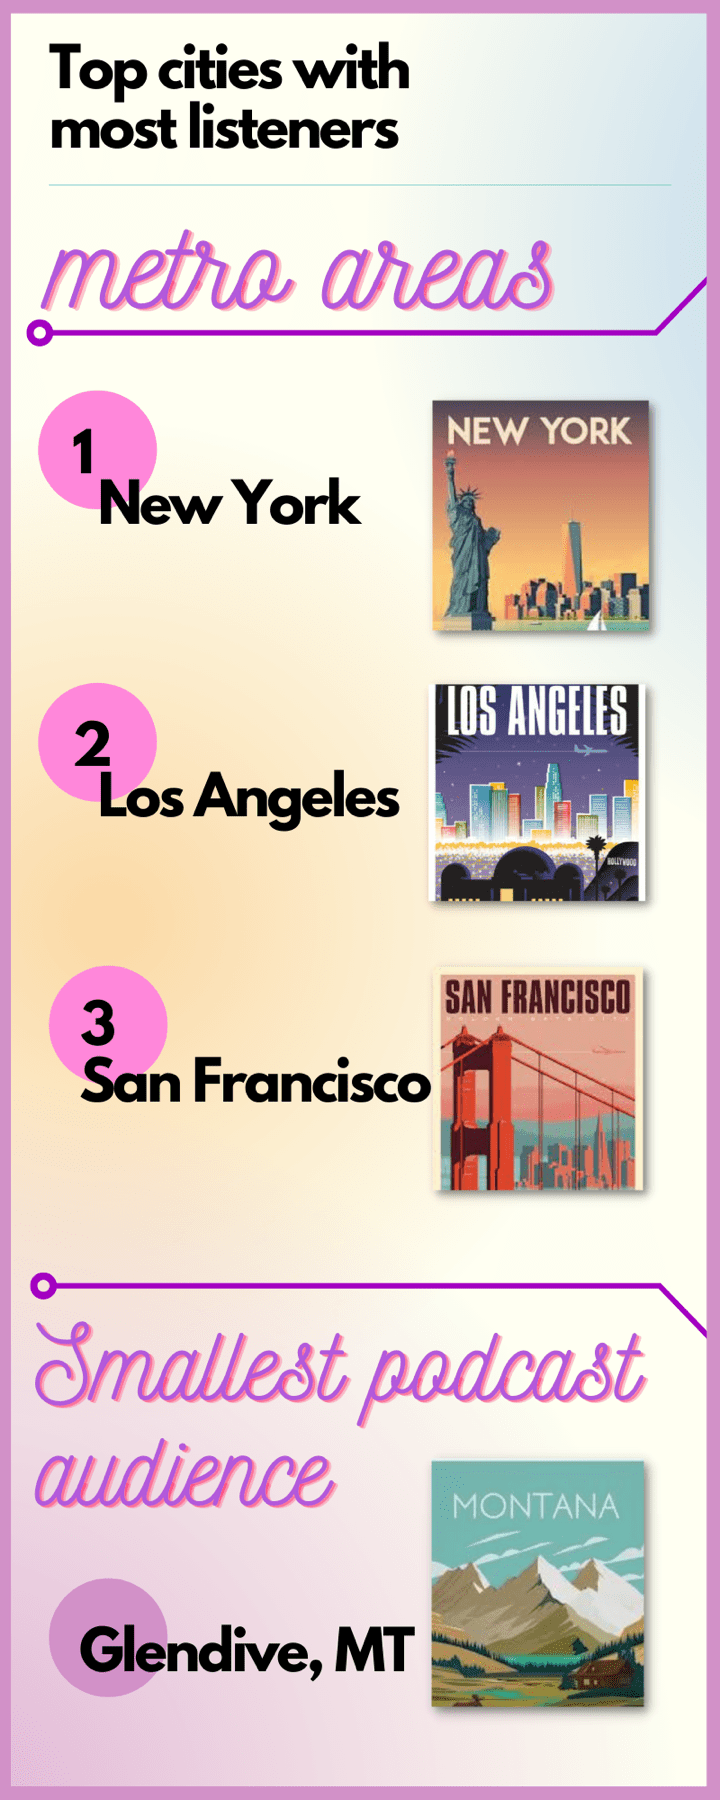 Top Cities with Most Listeners and least listeners